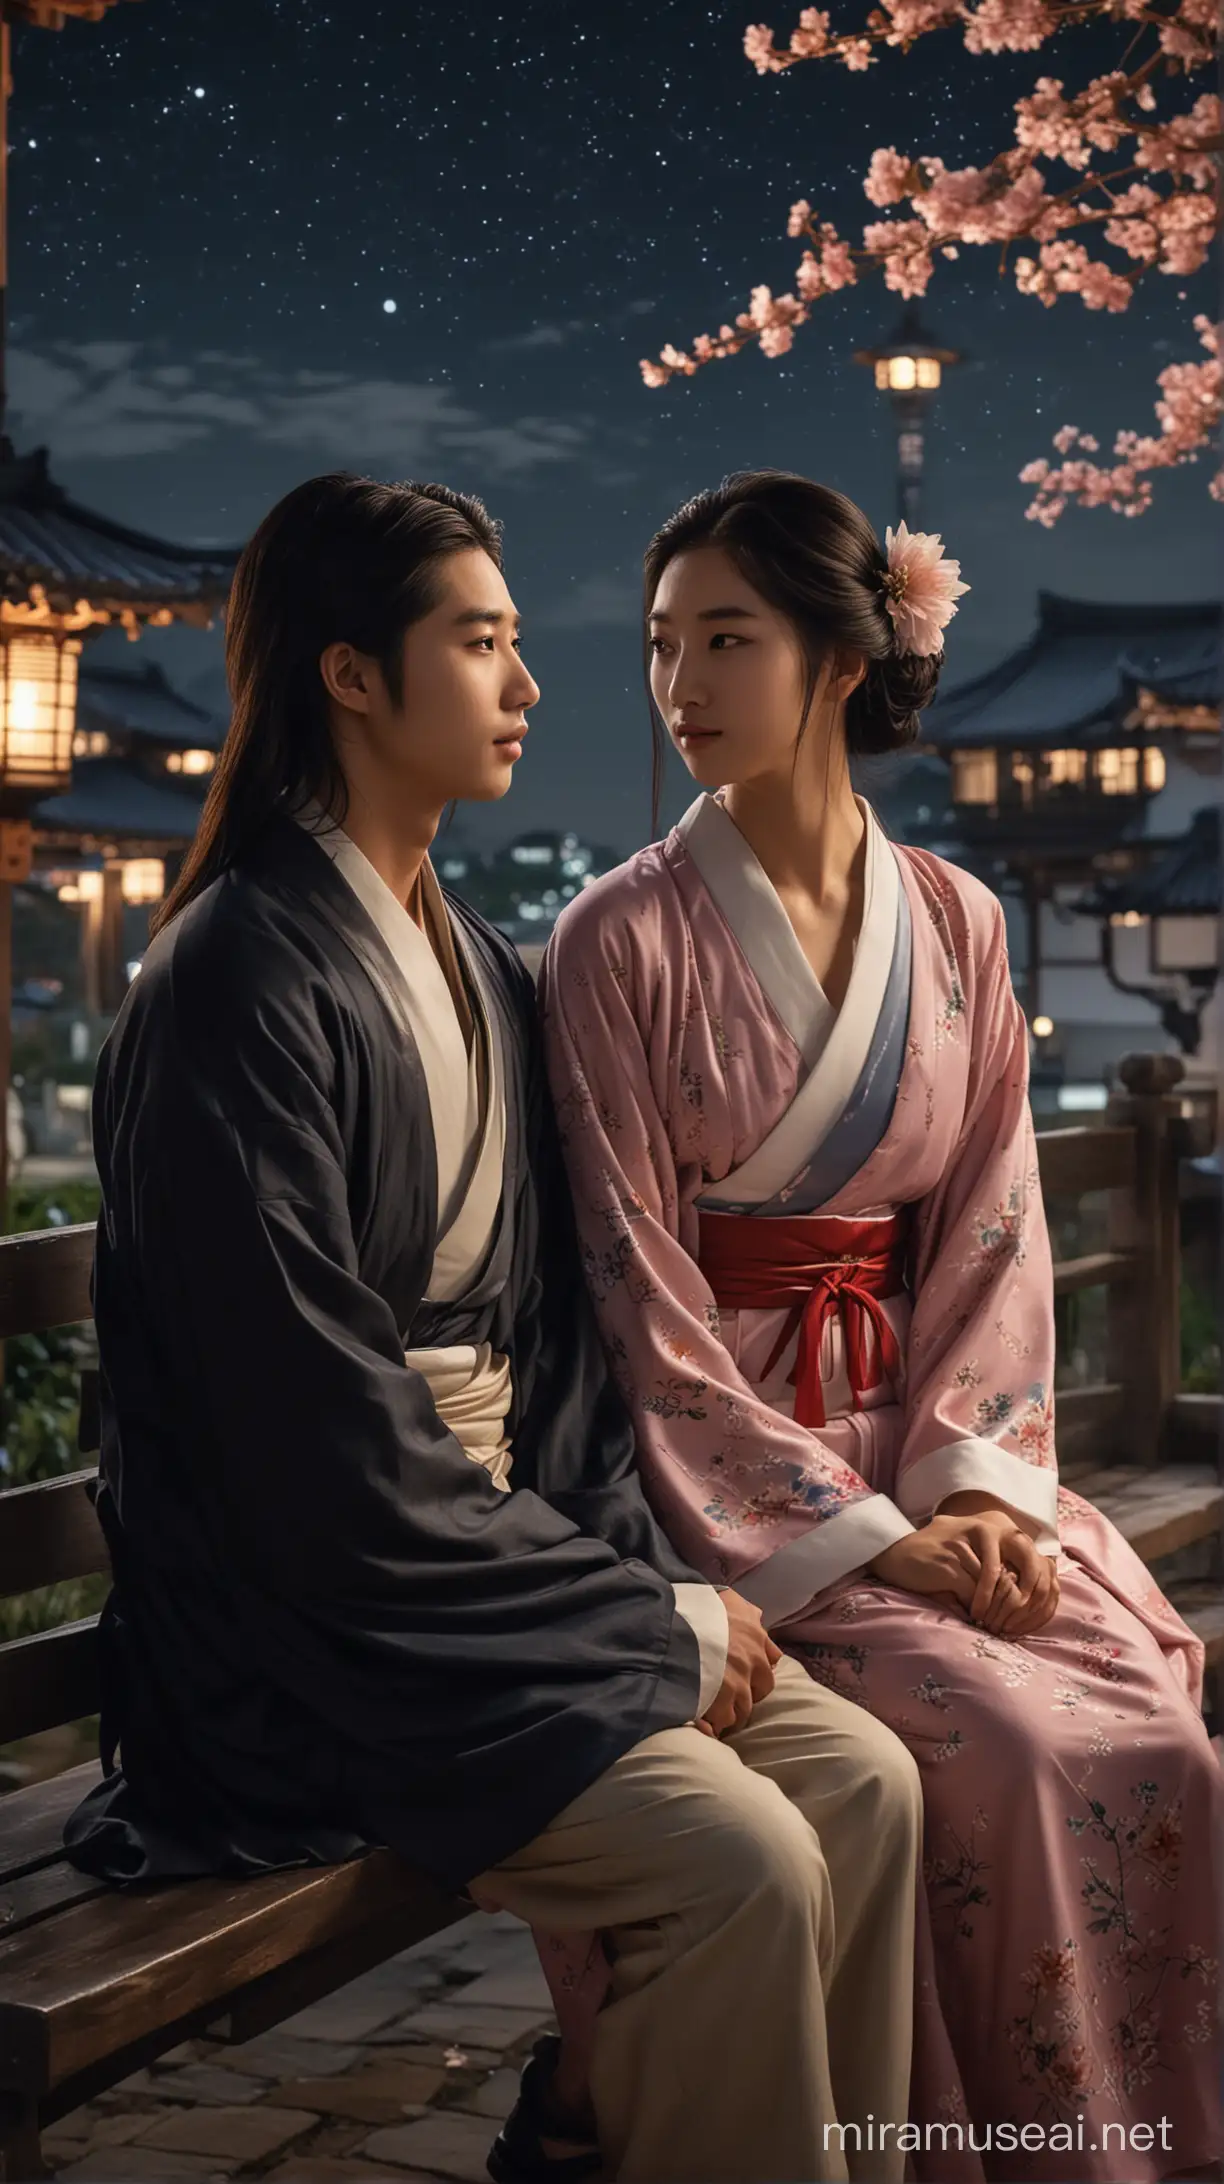 A romantic scene of a young couple sitting on a bench under the night sky in an East Asian architectural setting, the girl with long black hair adorned with a flower, gazing at the viewer, while the boy with long hair looks at her lovingly. The image is detailed and realistic, highlighting the beauty of the moment with a touch of hetero romance. --s 150 --ar 9:16 --c 5